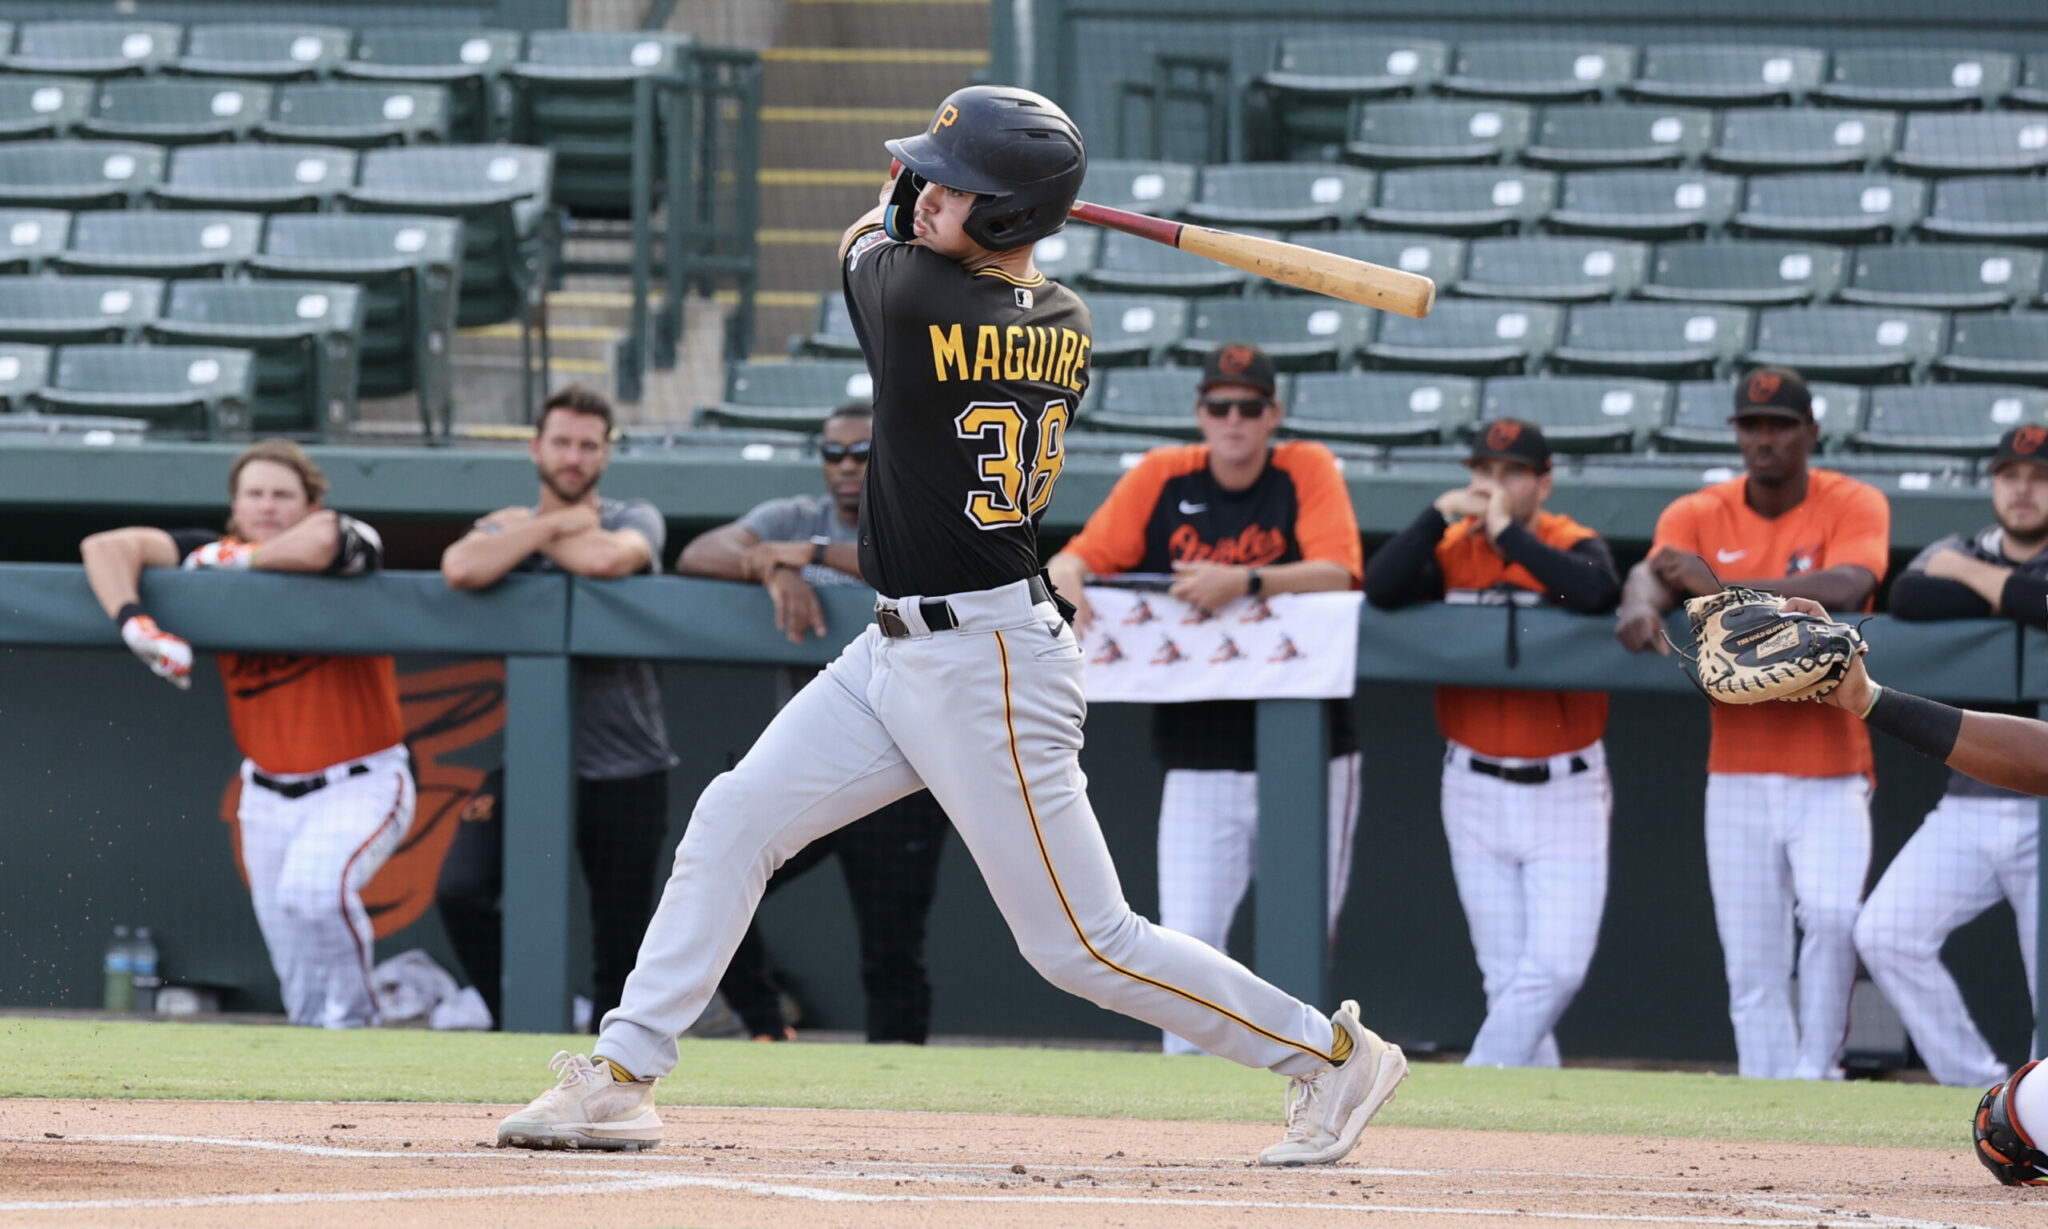 Pirates Winter Leagues: All Six Pirates Contribute to a One-Sided Win in Australia